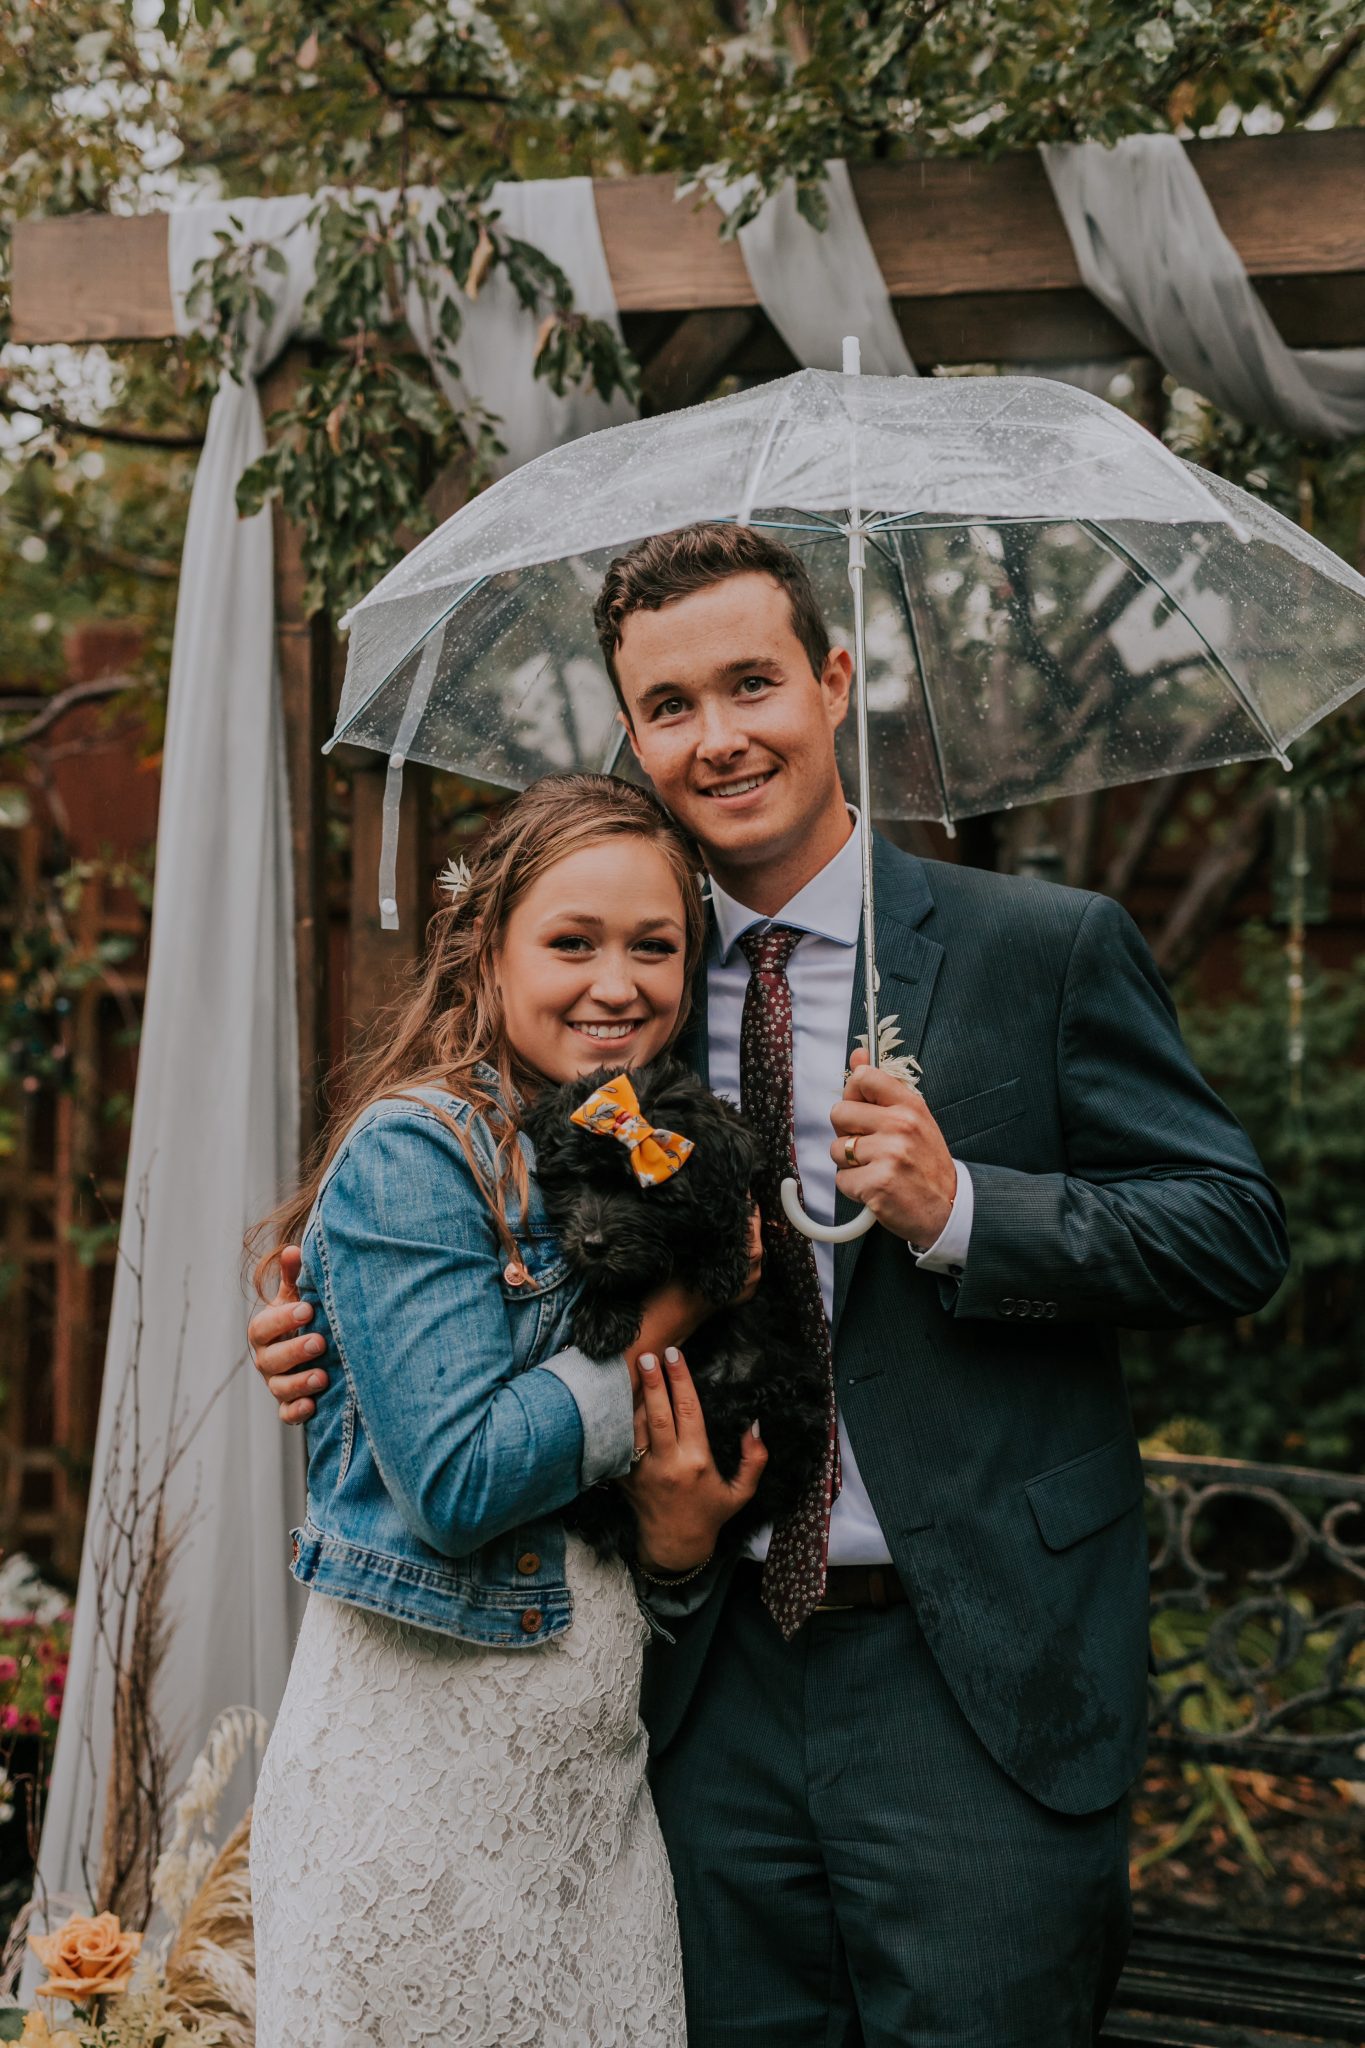 A Little Bit of Rain and Covid Restrictions weren't about to Slow This Couple Down! Featured on Brontë Bride, outdoor wedding, backyard wedding